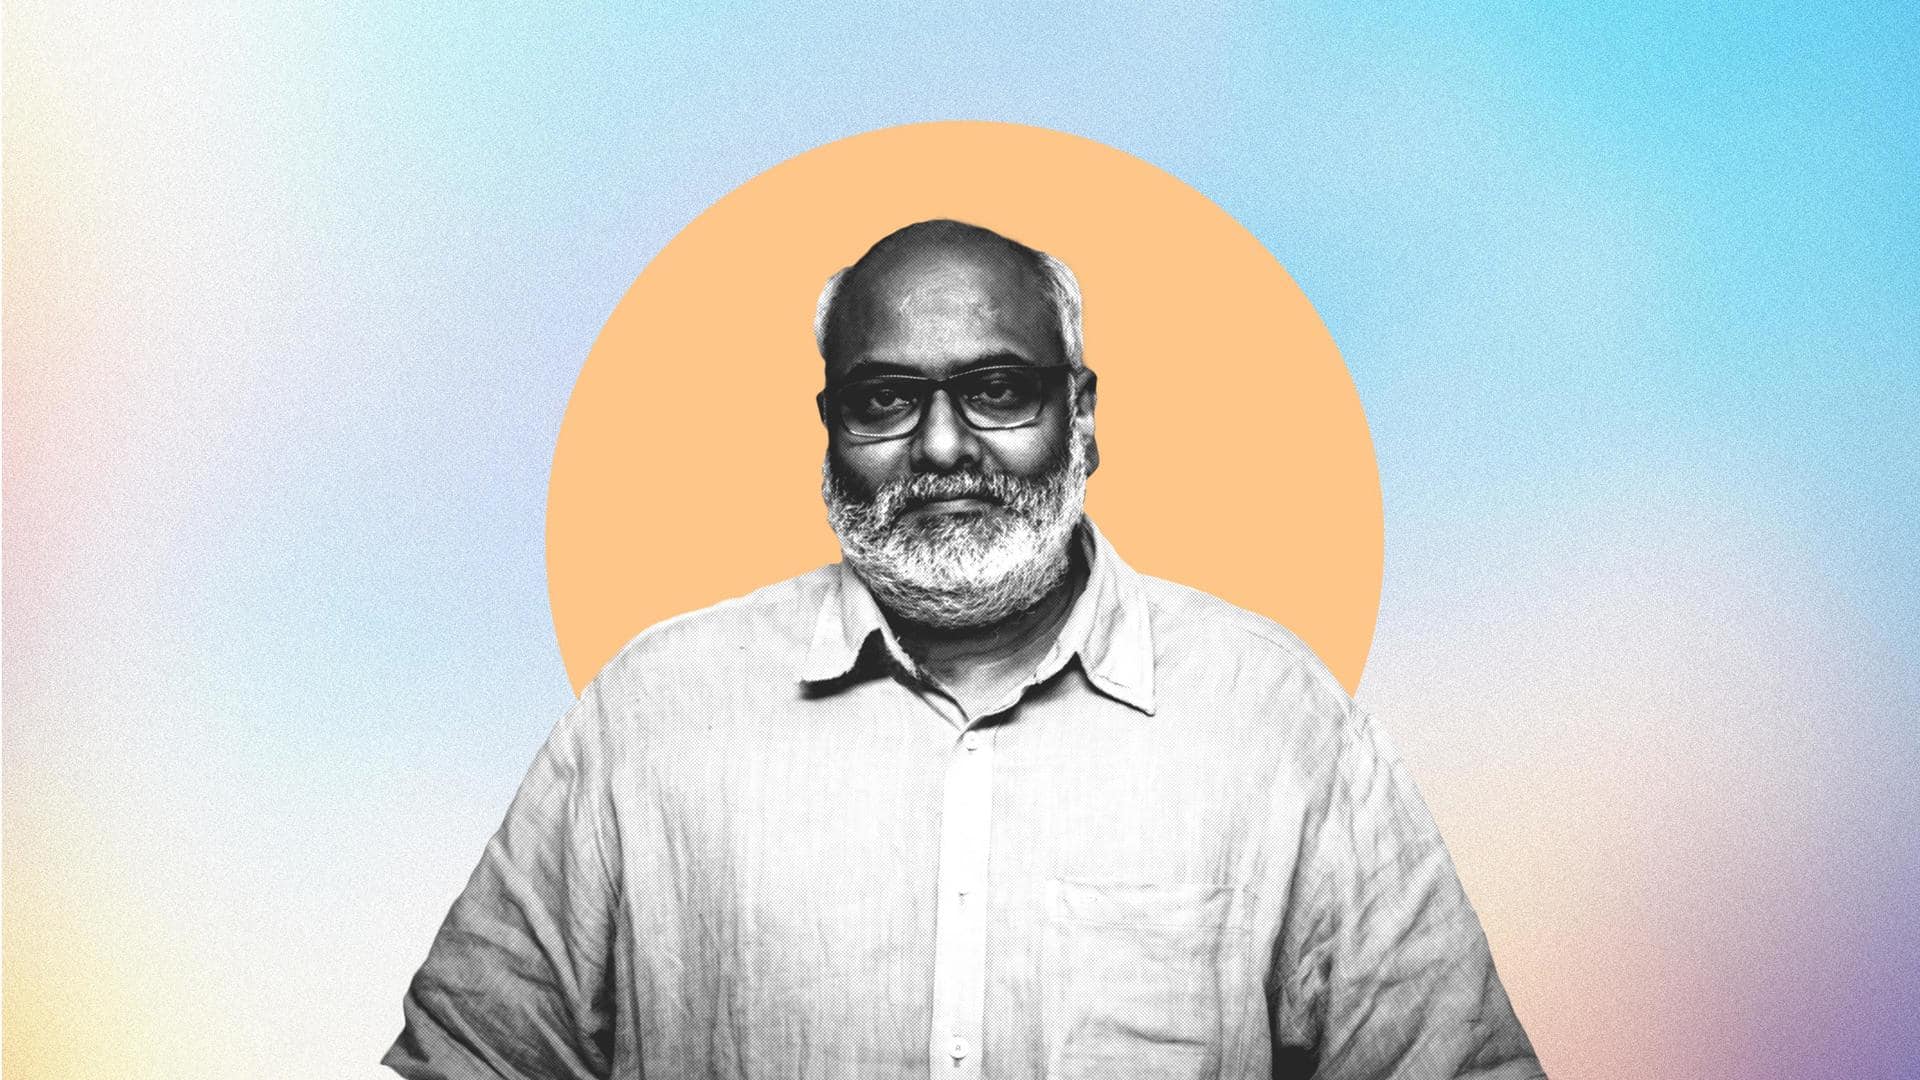 MM Keeravani's birthday: Remembering his notable compositions